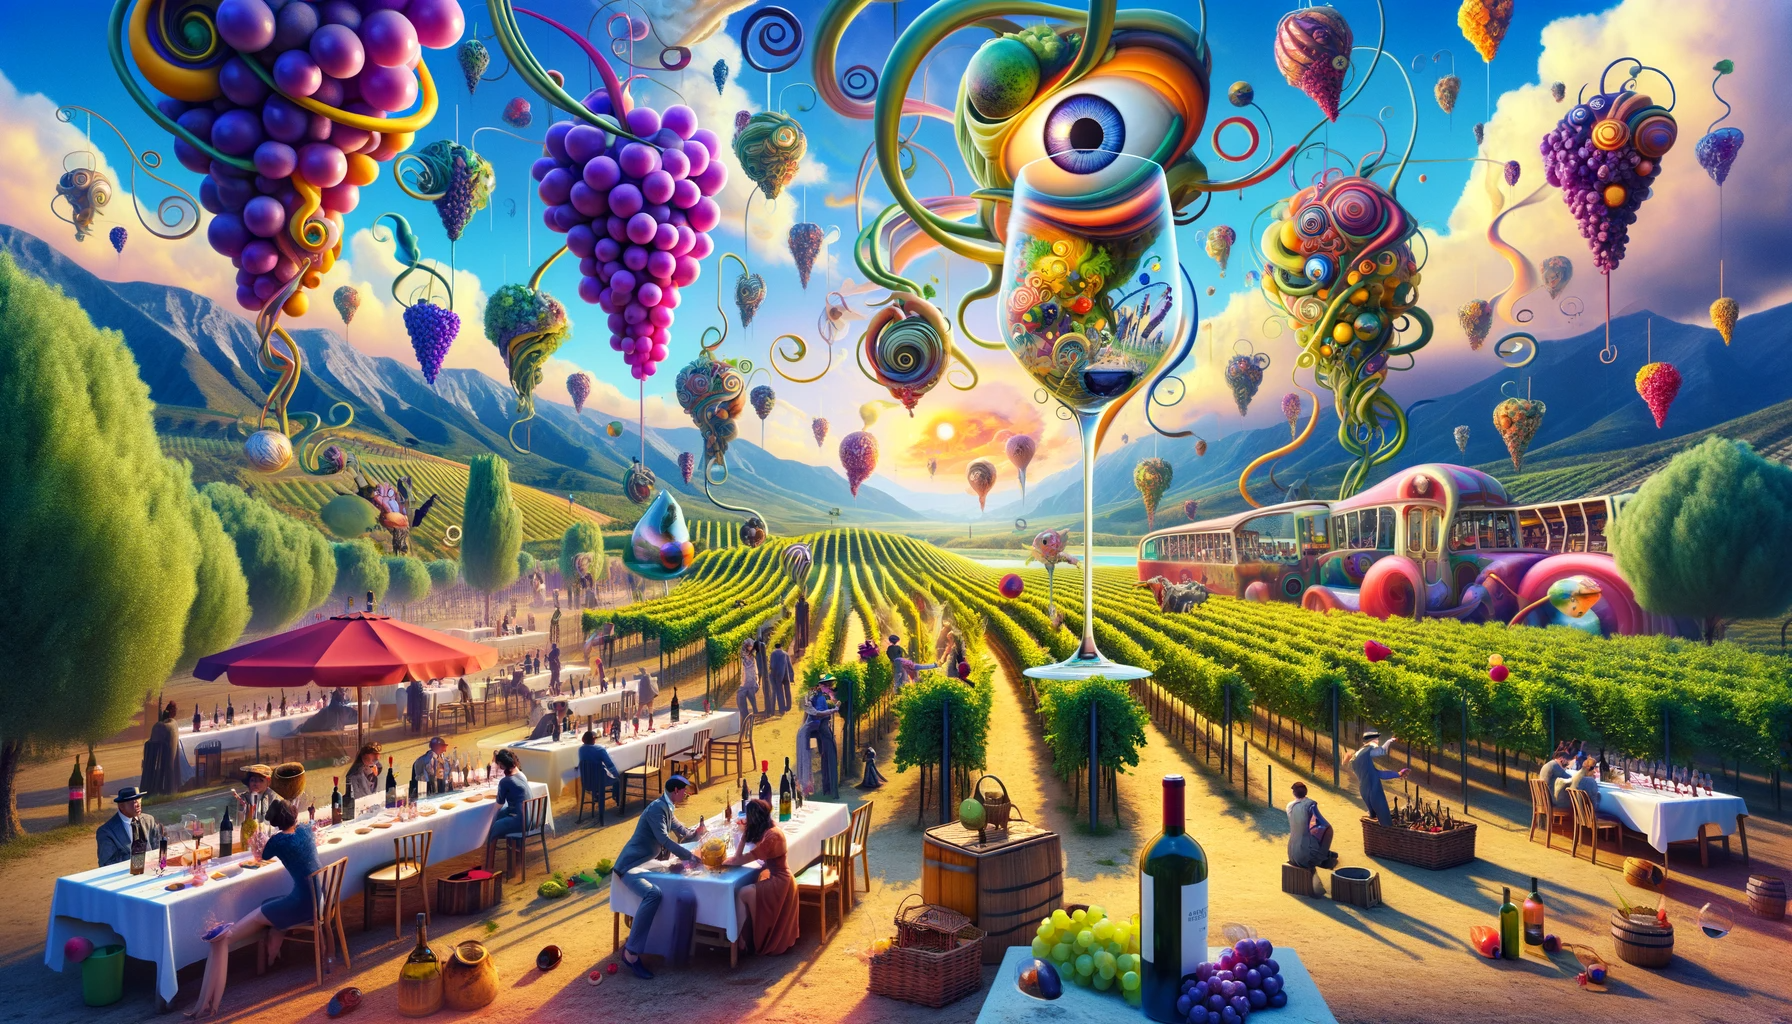 surrealistic-style-inspired-by-Salvador-Dali-themed-Interactive-Wine-Events-in-Spain